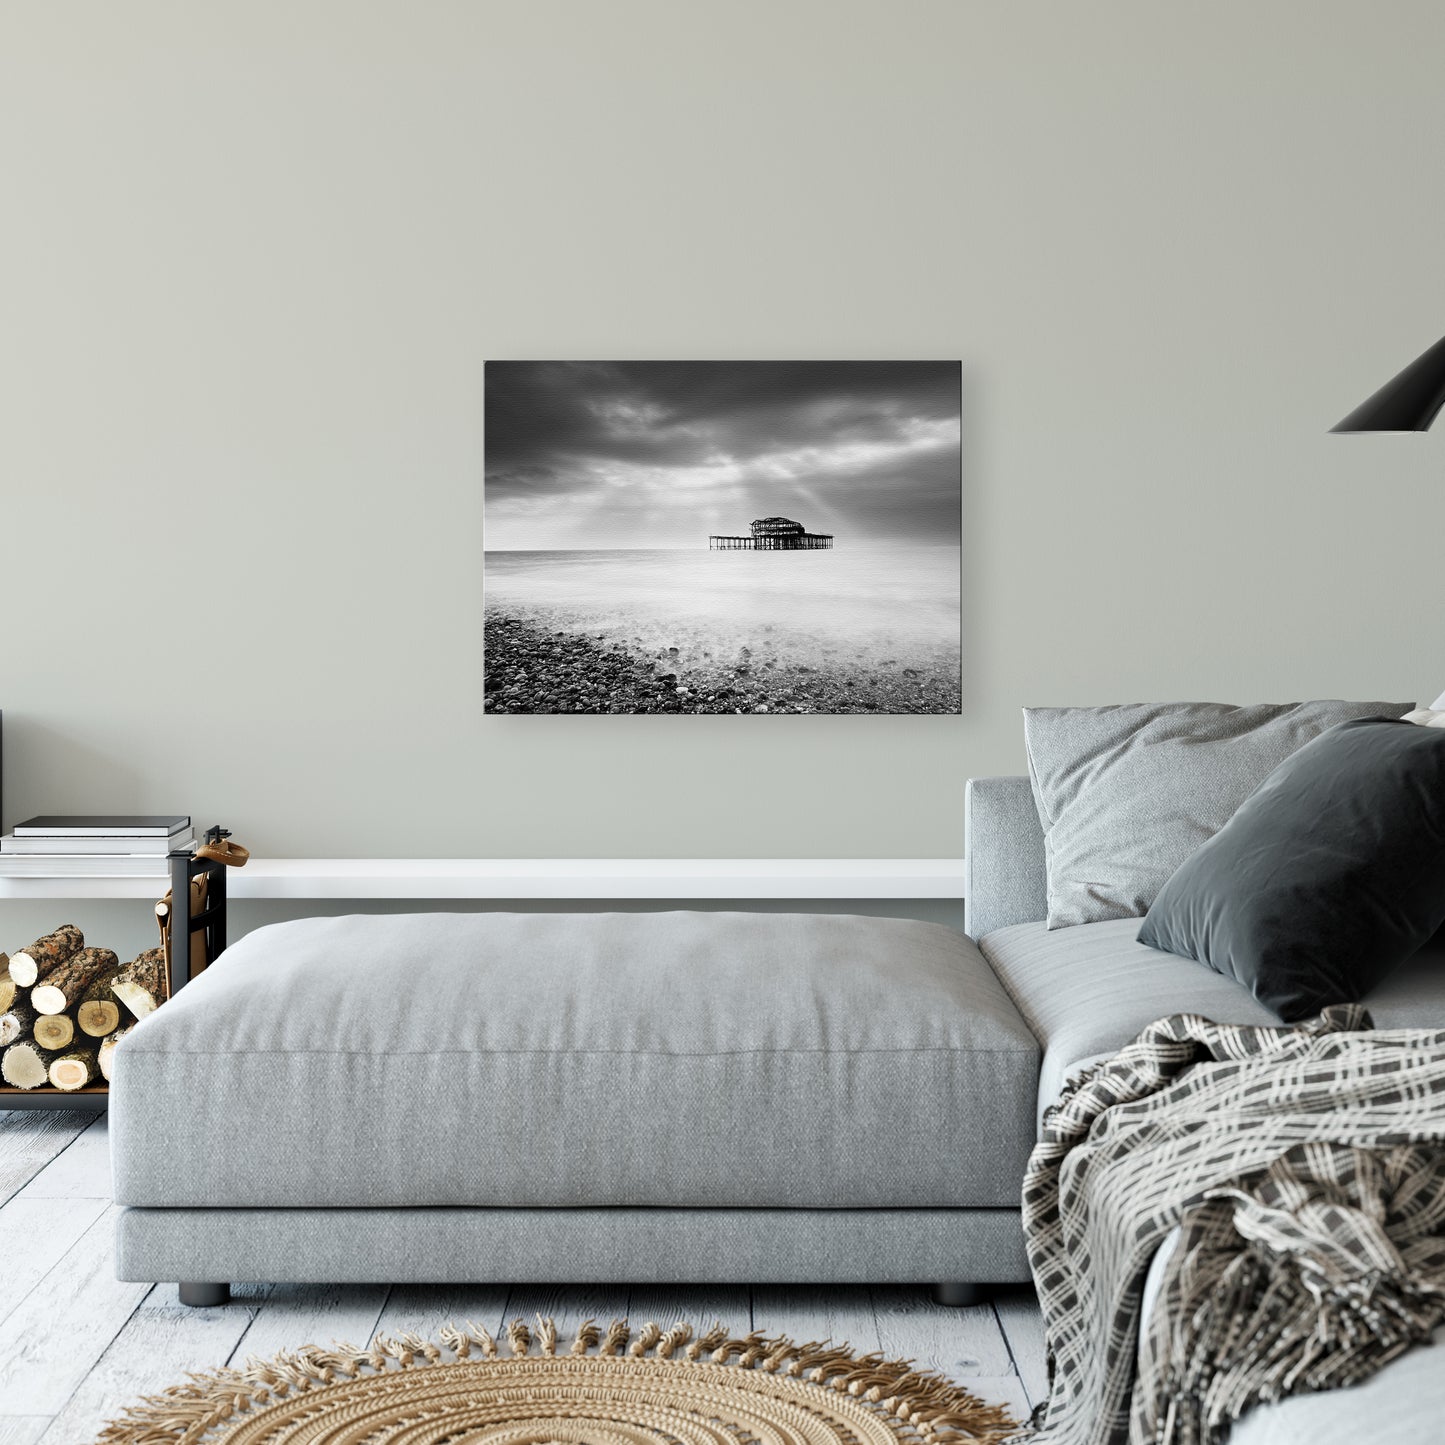 Behind Couch Wall Decor: Abandoned West Pier Black and White - Coastal / Beach / Seascape / Nature / Landscape Photo Canvas Wall Art Print - Artwork - Wall Decor